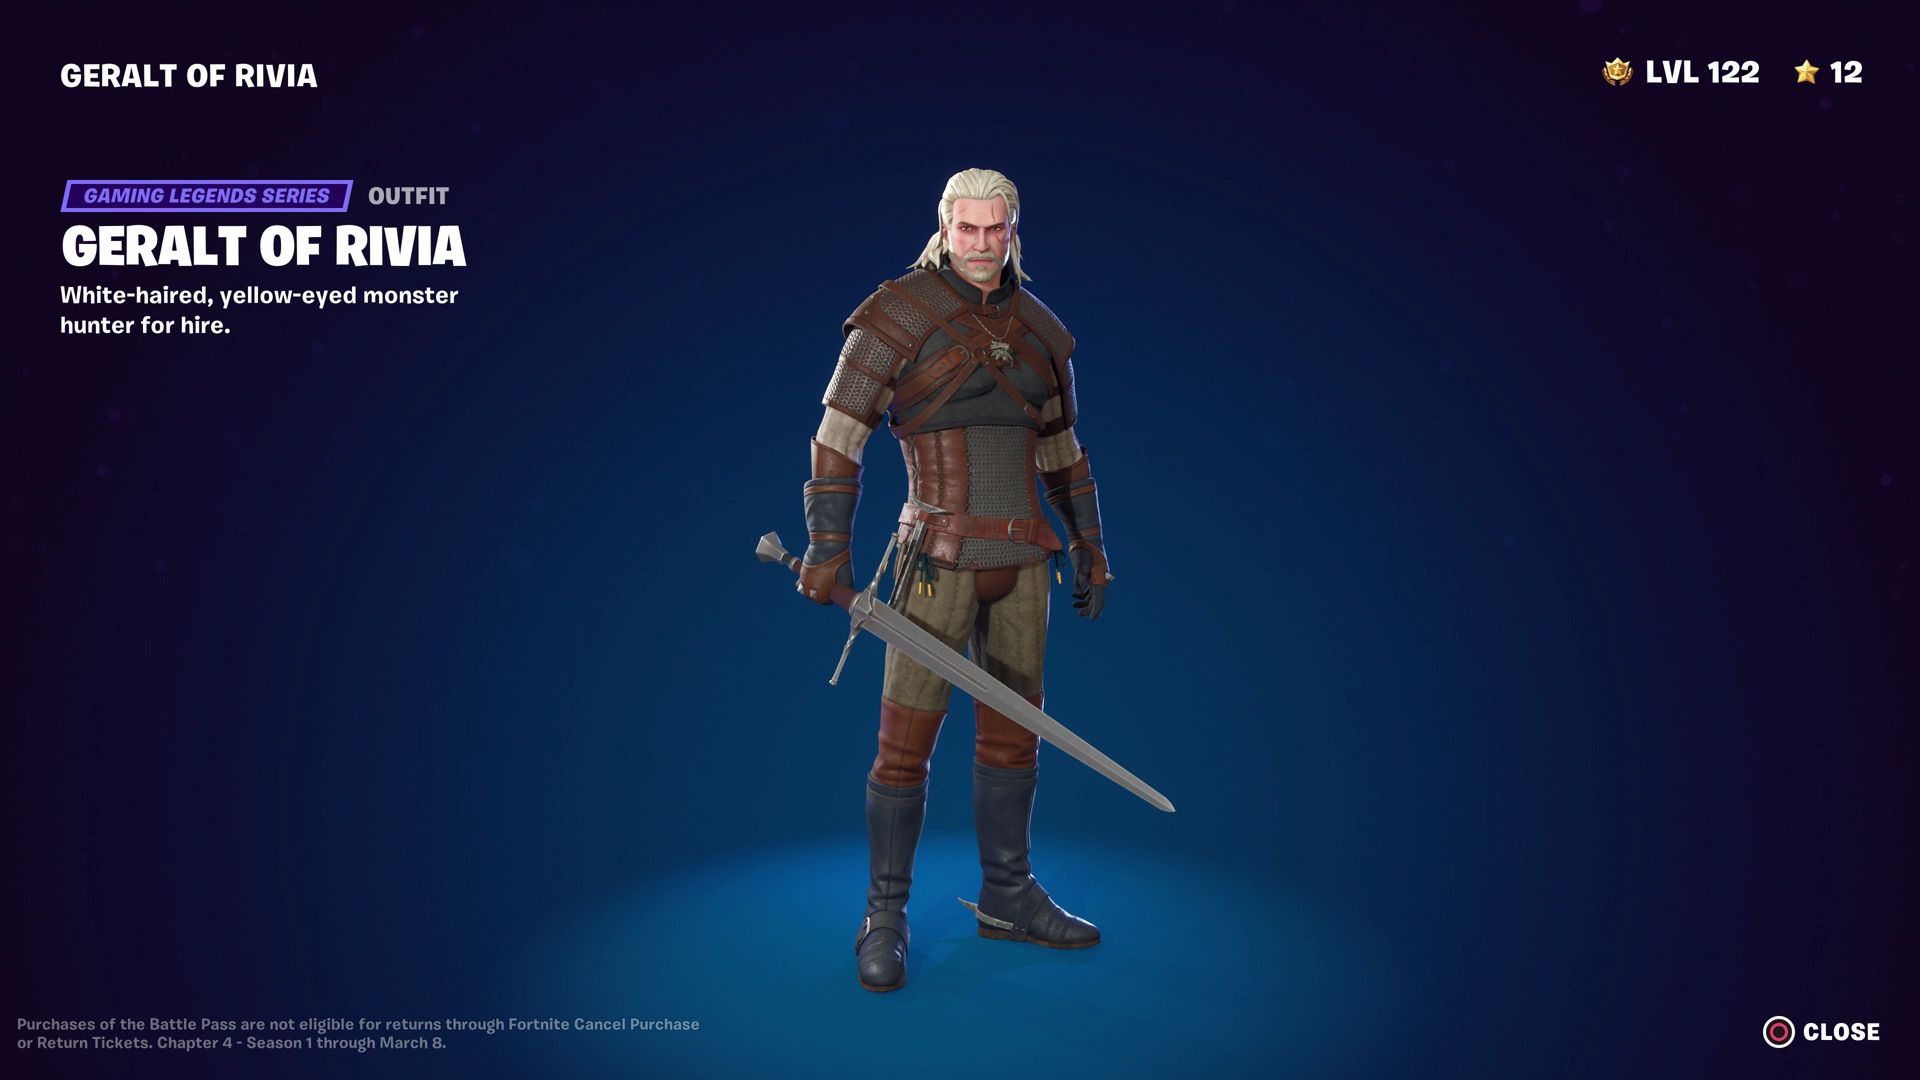 Fortnite Players Call New Witcher Content ‘Big Disappointment’ After ‘Barely Noticeable Color Change’